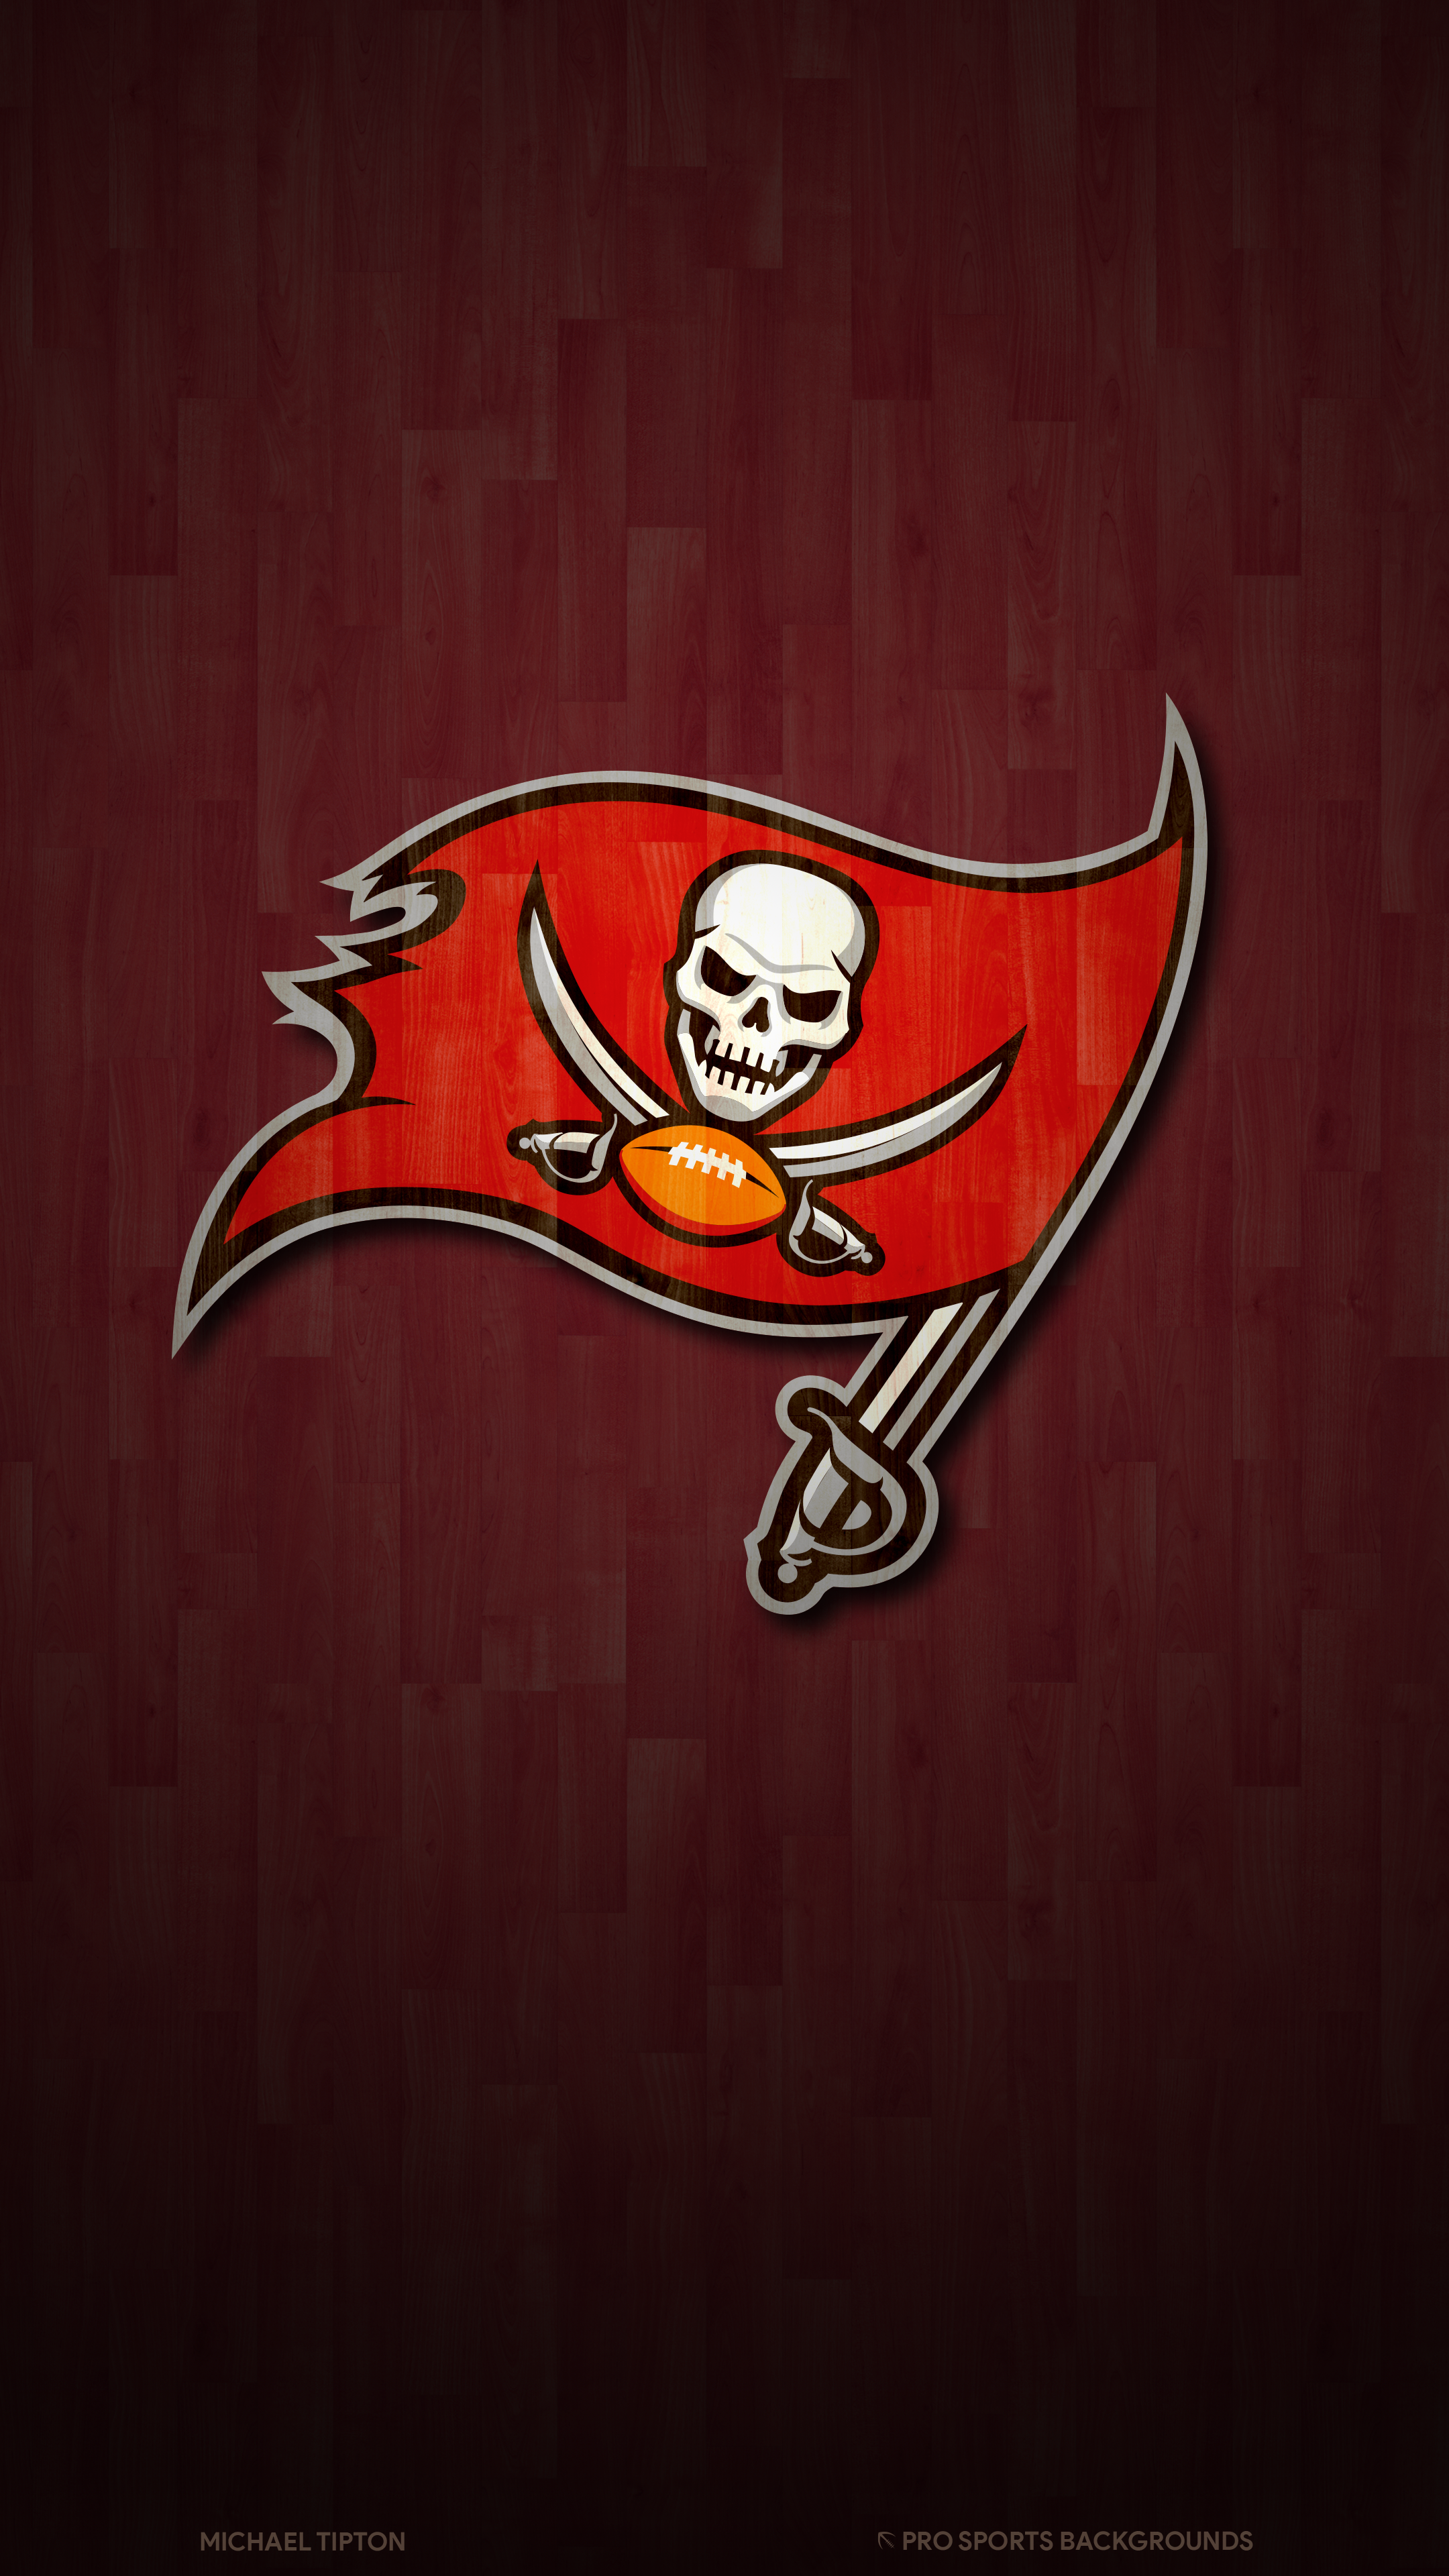 Tampa Bay Buccaneers Wallpaper. Pro Sports Background